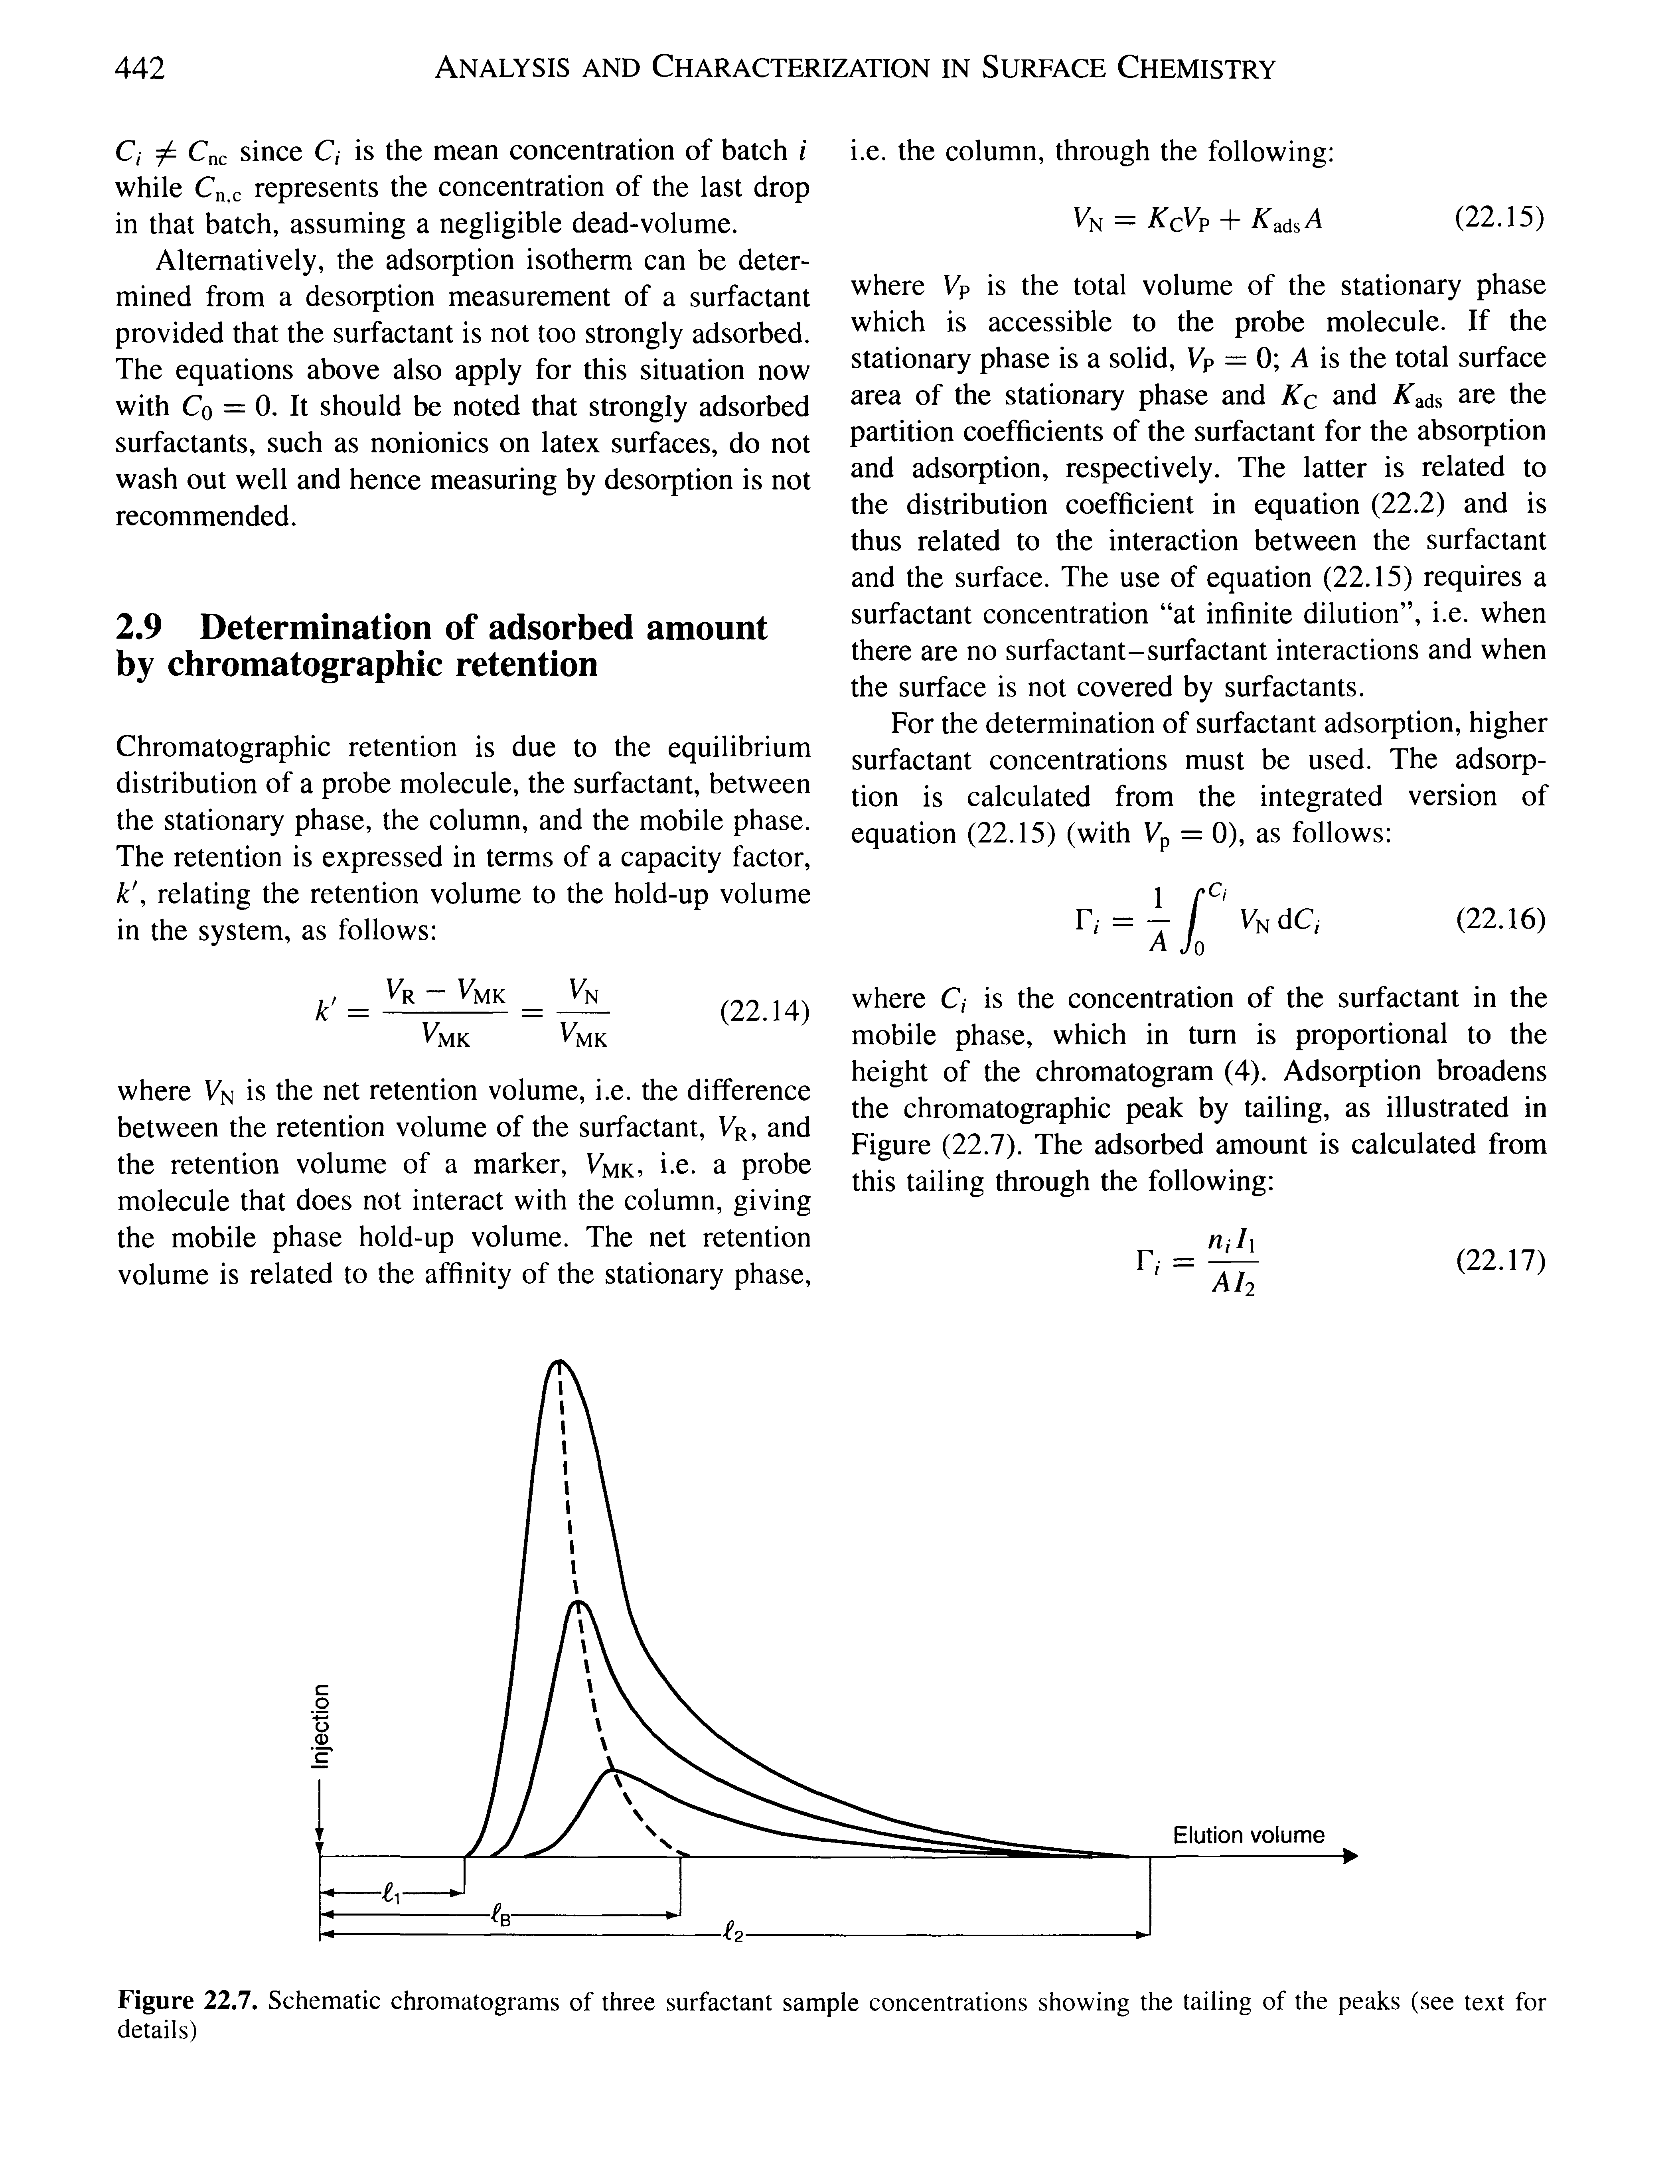 Figure 22.7. Schematic chromatograms of three surfactant sample concentrations showing the tailing of the peaks (see text for details)...